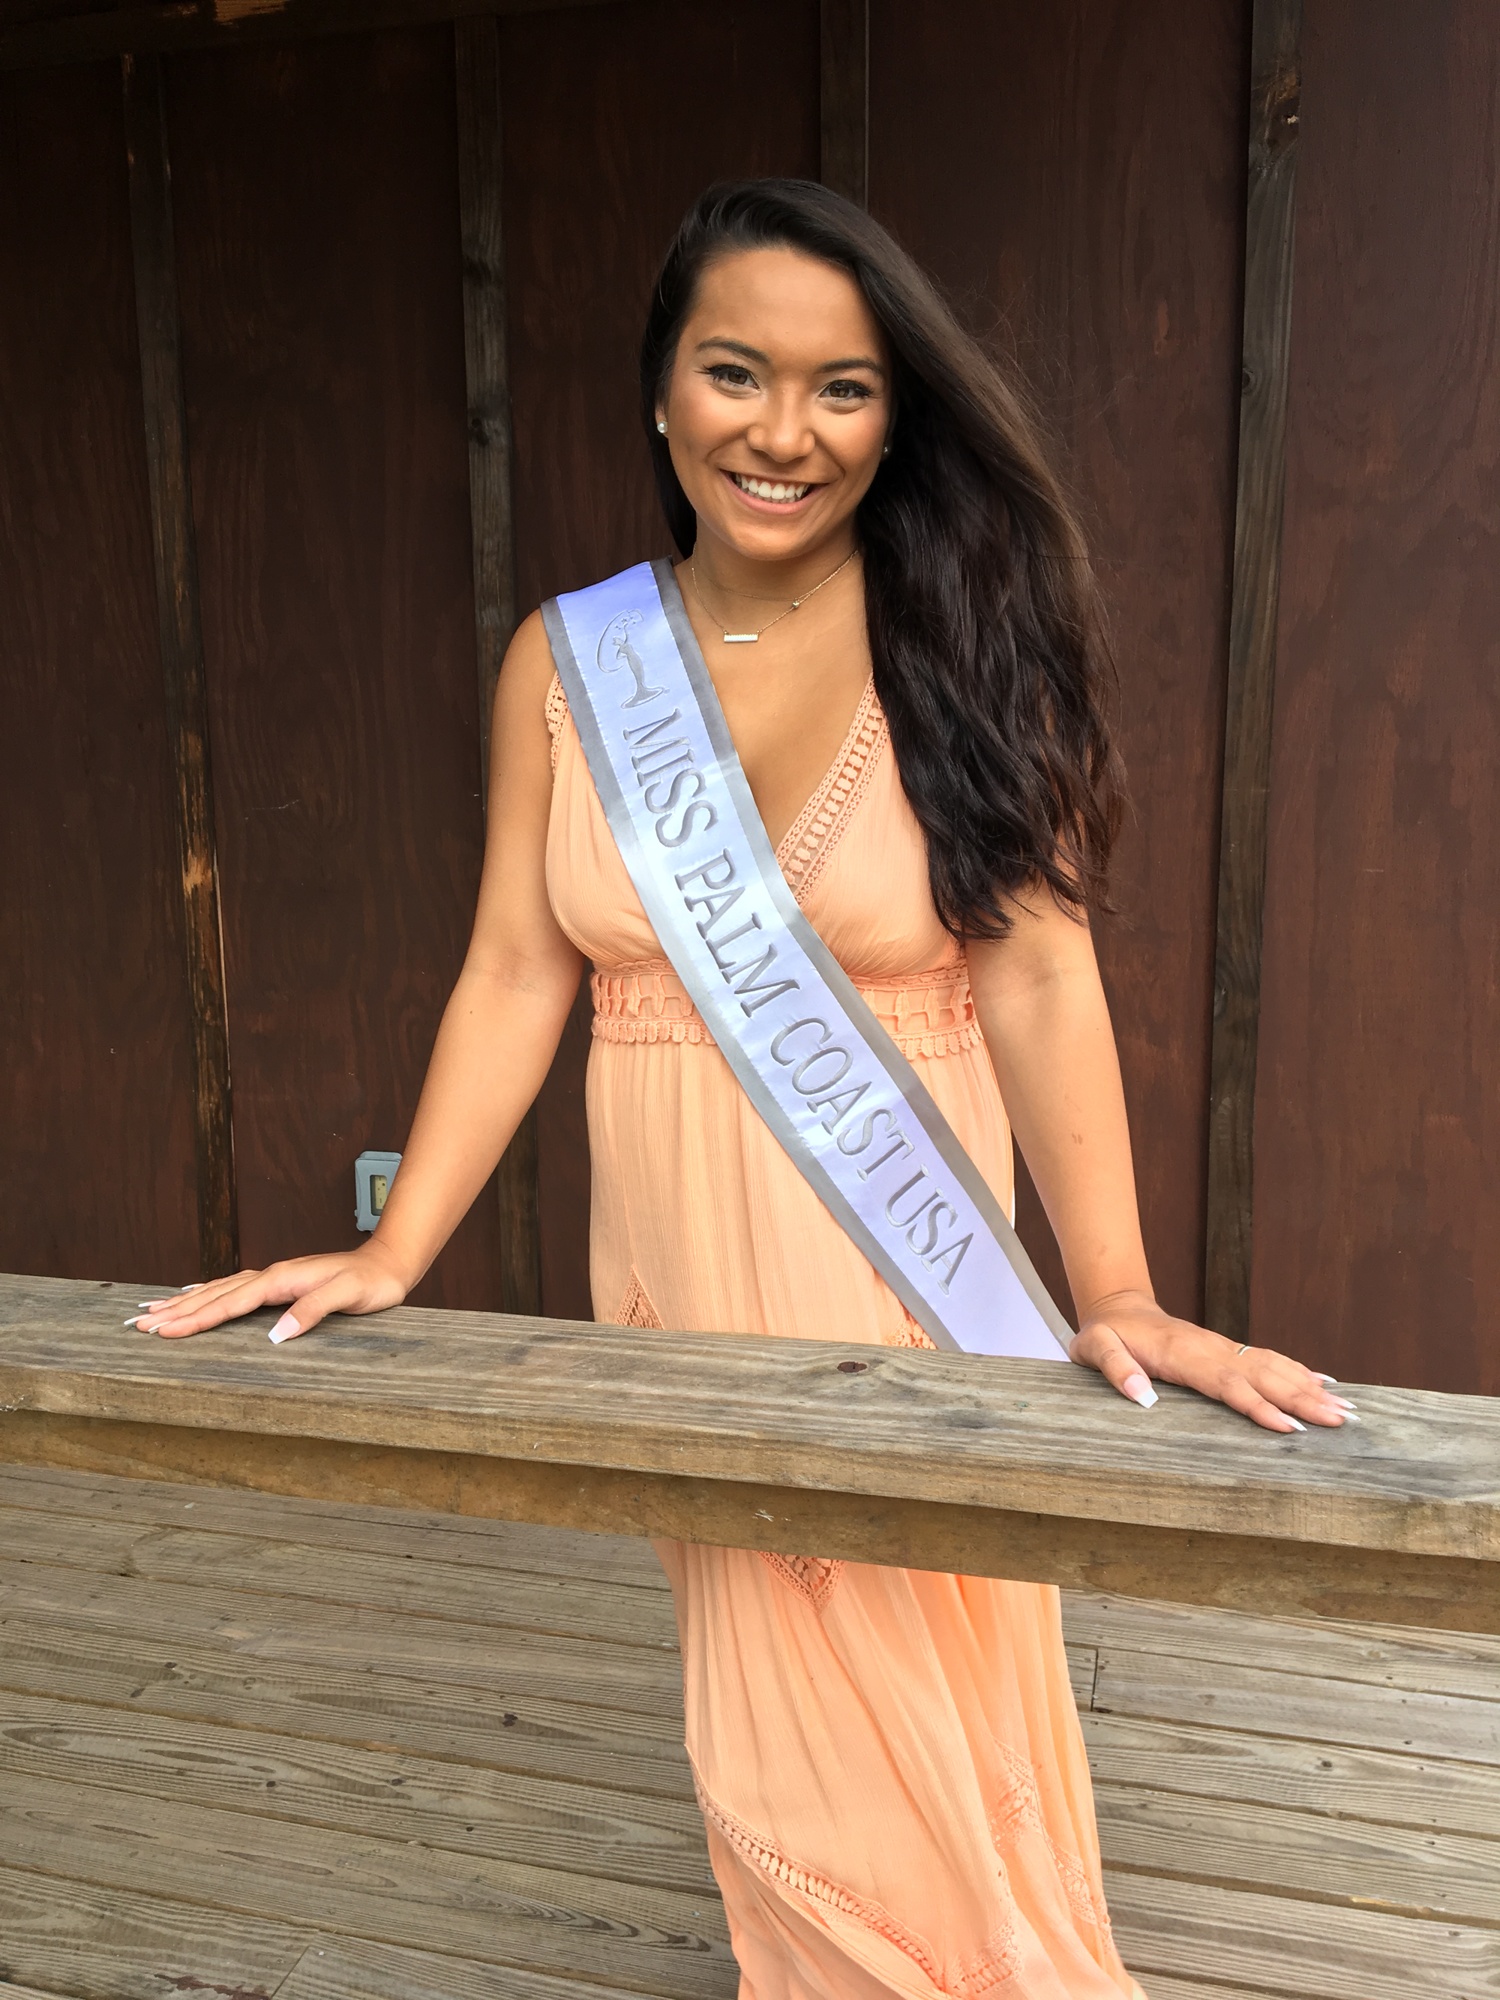 Miss Palm Coast Emily Palisoc was formerly Miss FPC 2014, along with several other pageant titles. Photo courtesy of Emily Palisoc